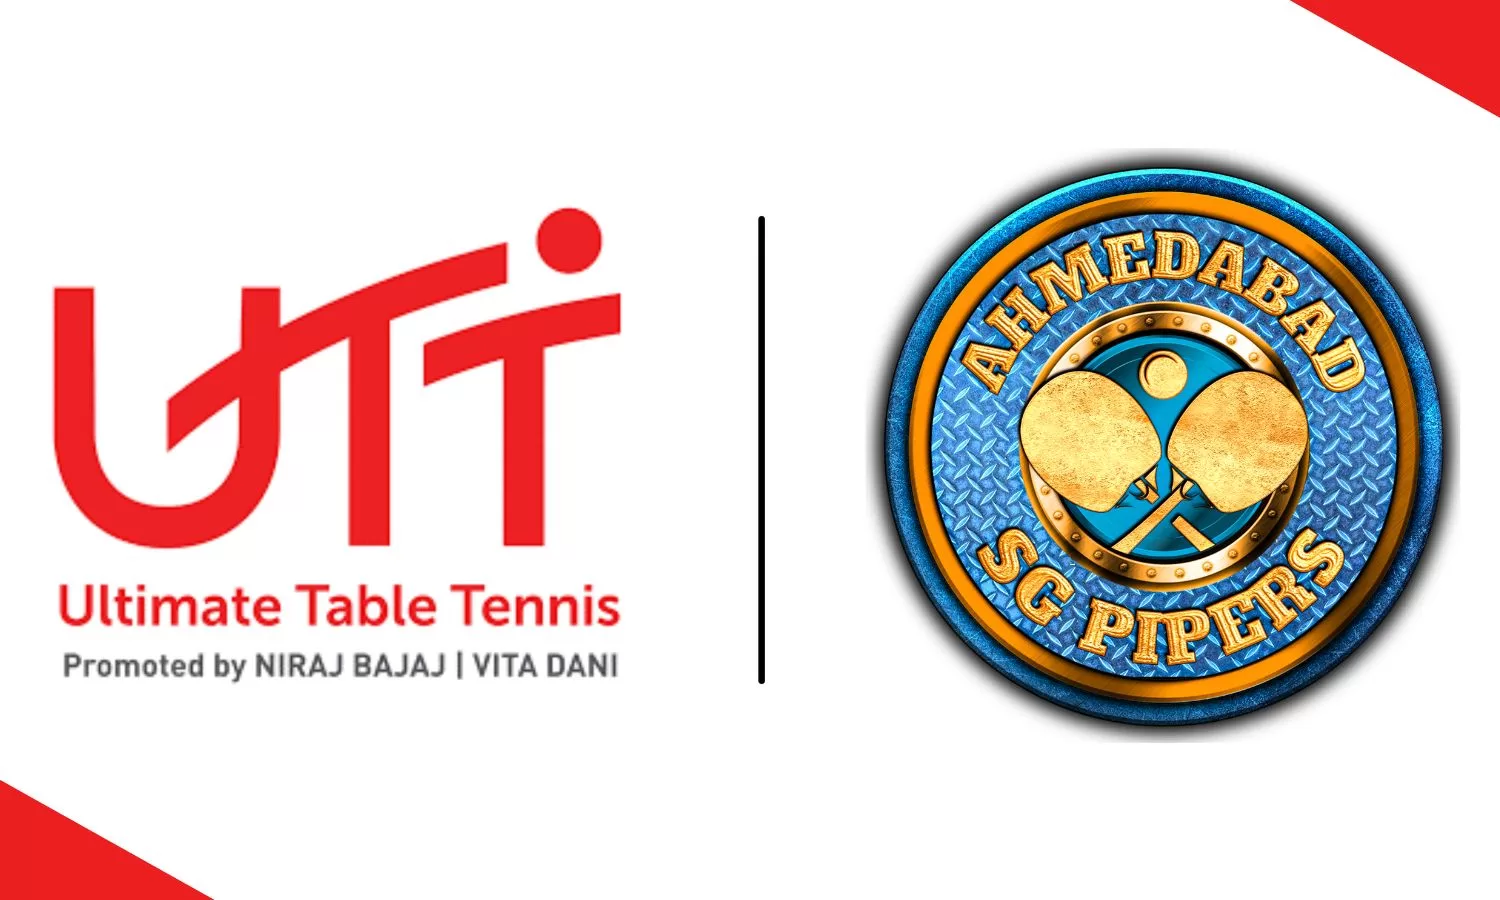 Ahmedabad SG Pipers enters Ultimate Table Tennis as eighth team